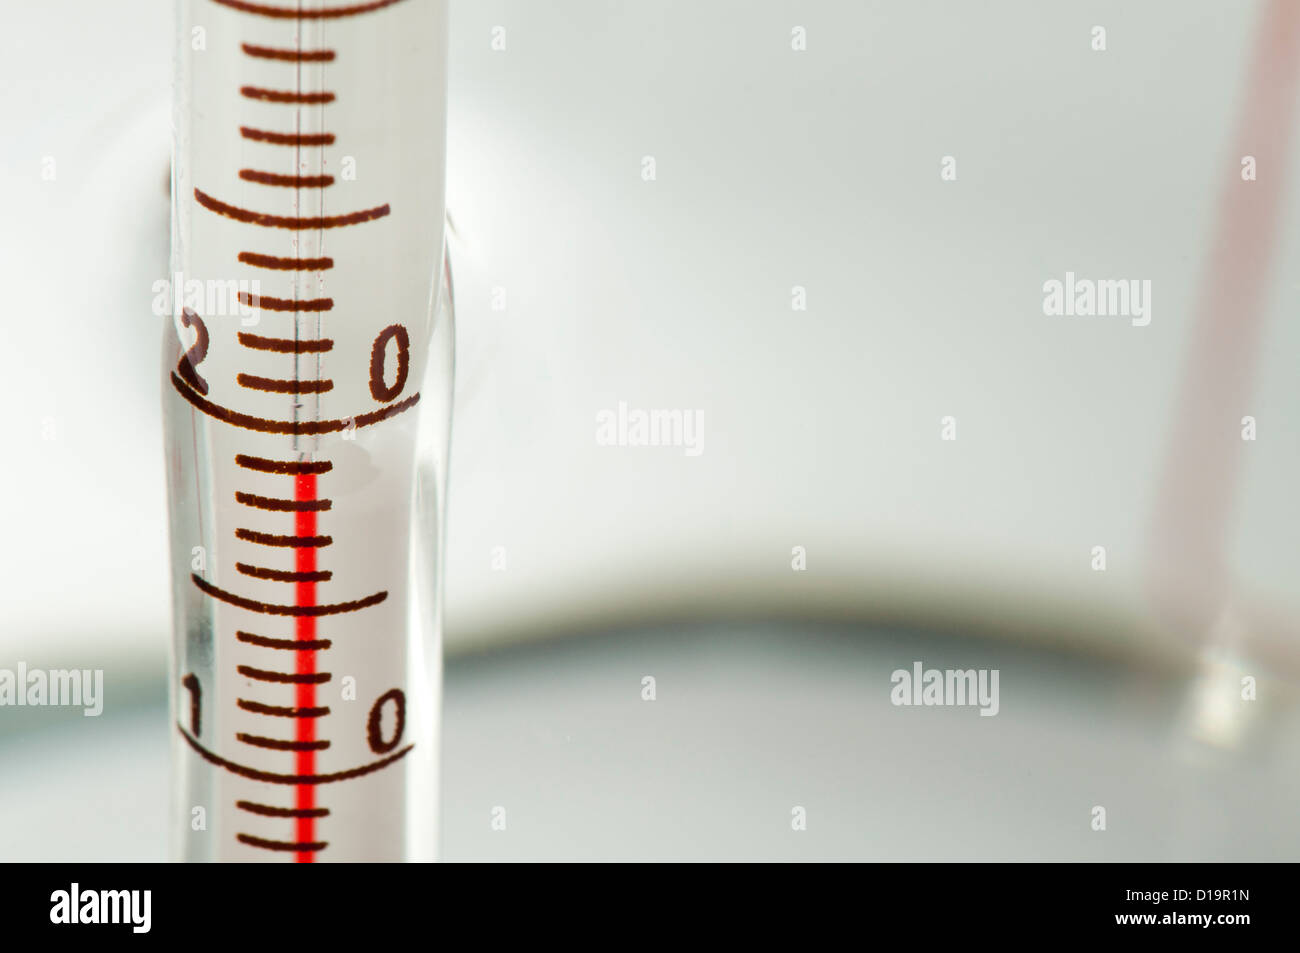 https://c8.alamy.com/comp/D19R1N/thermometer-measures-the-temperature-of-the-water-close-up-D19R1N.jpg